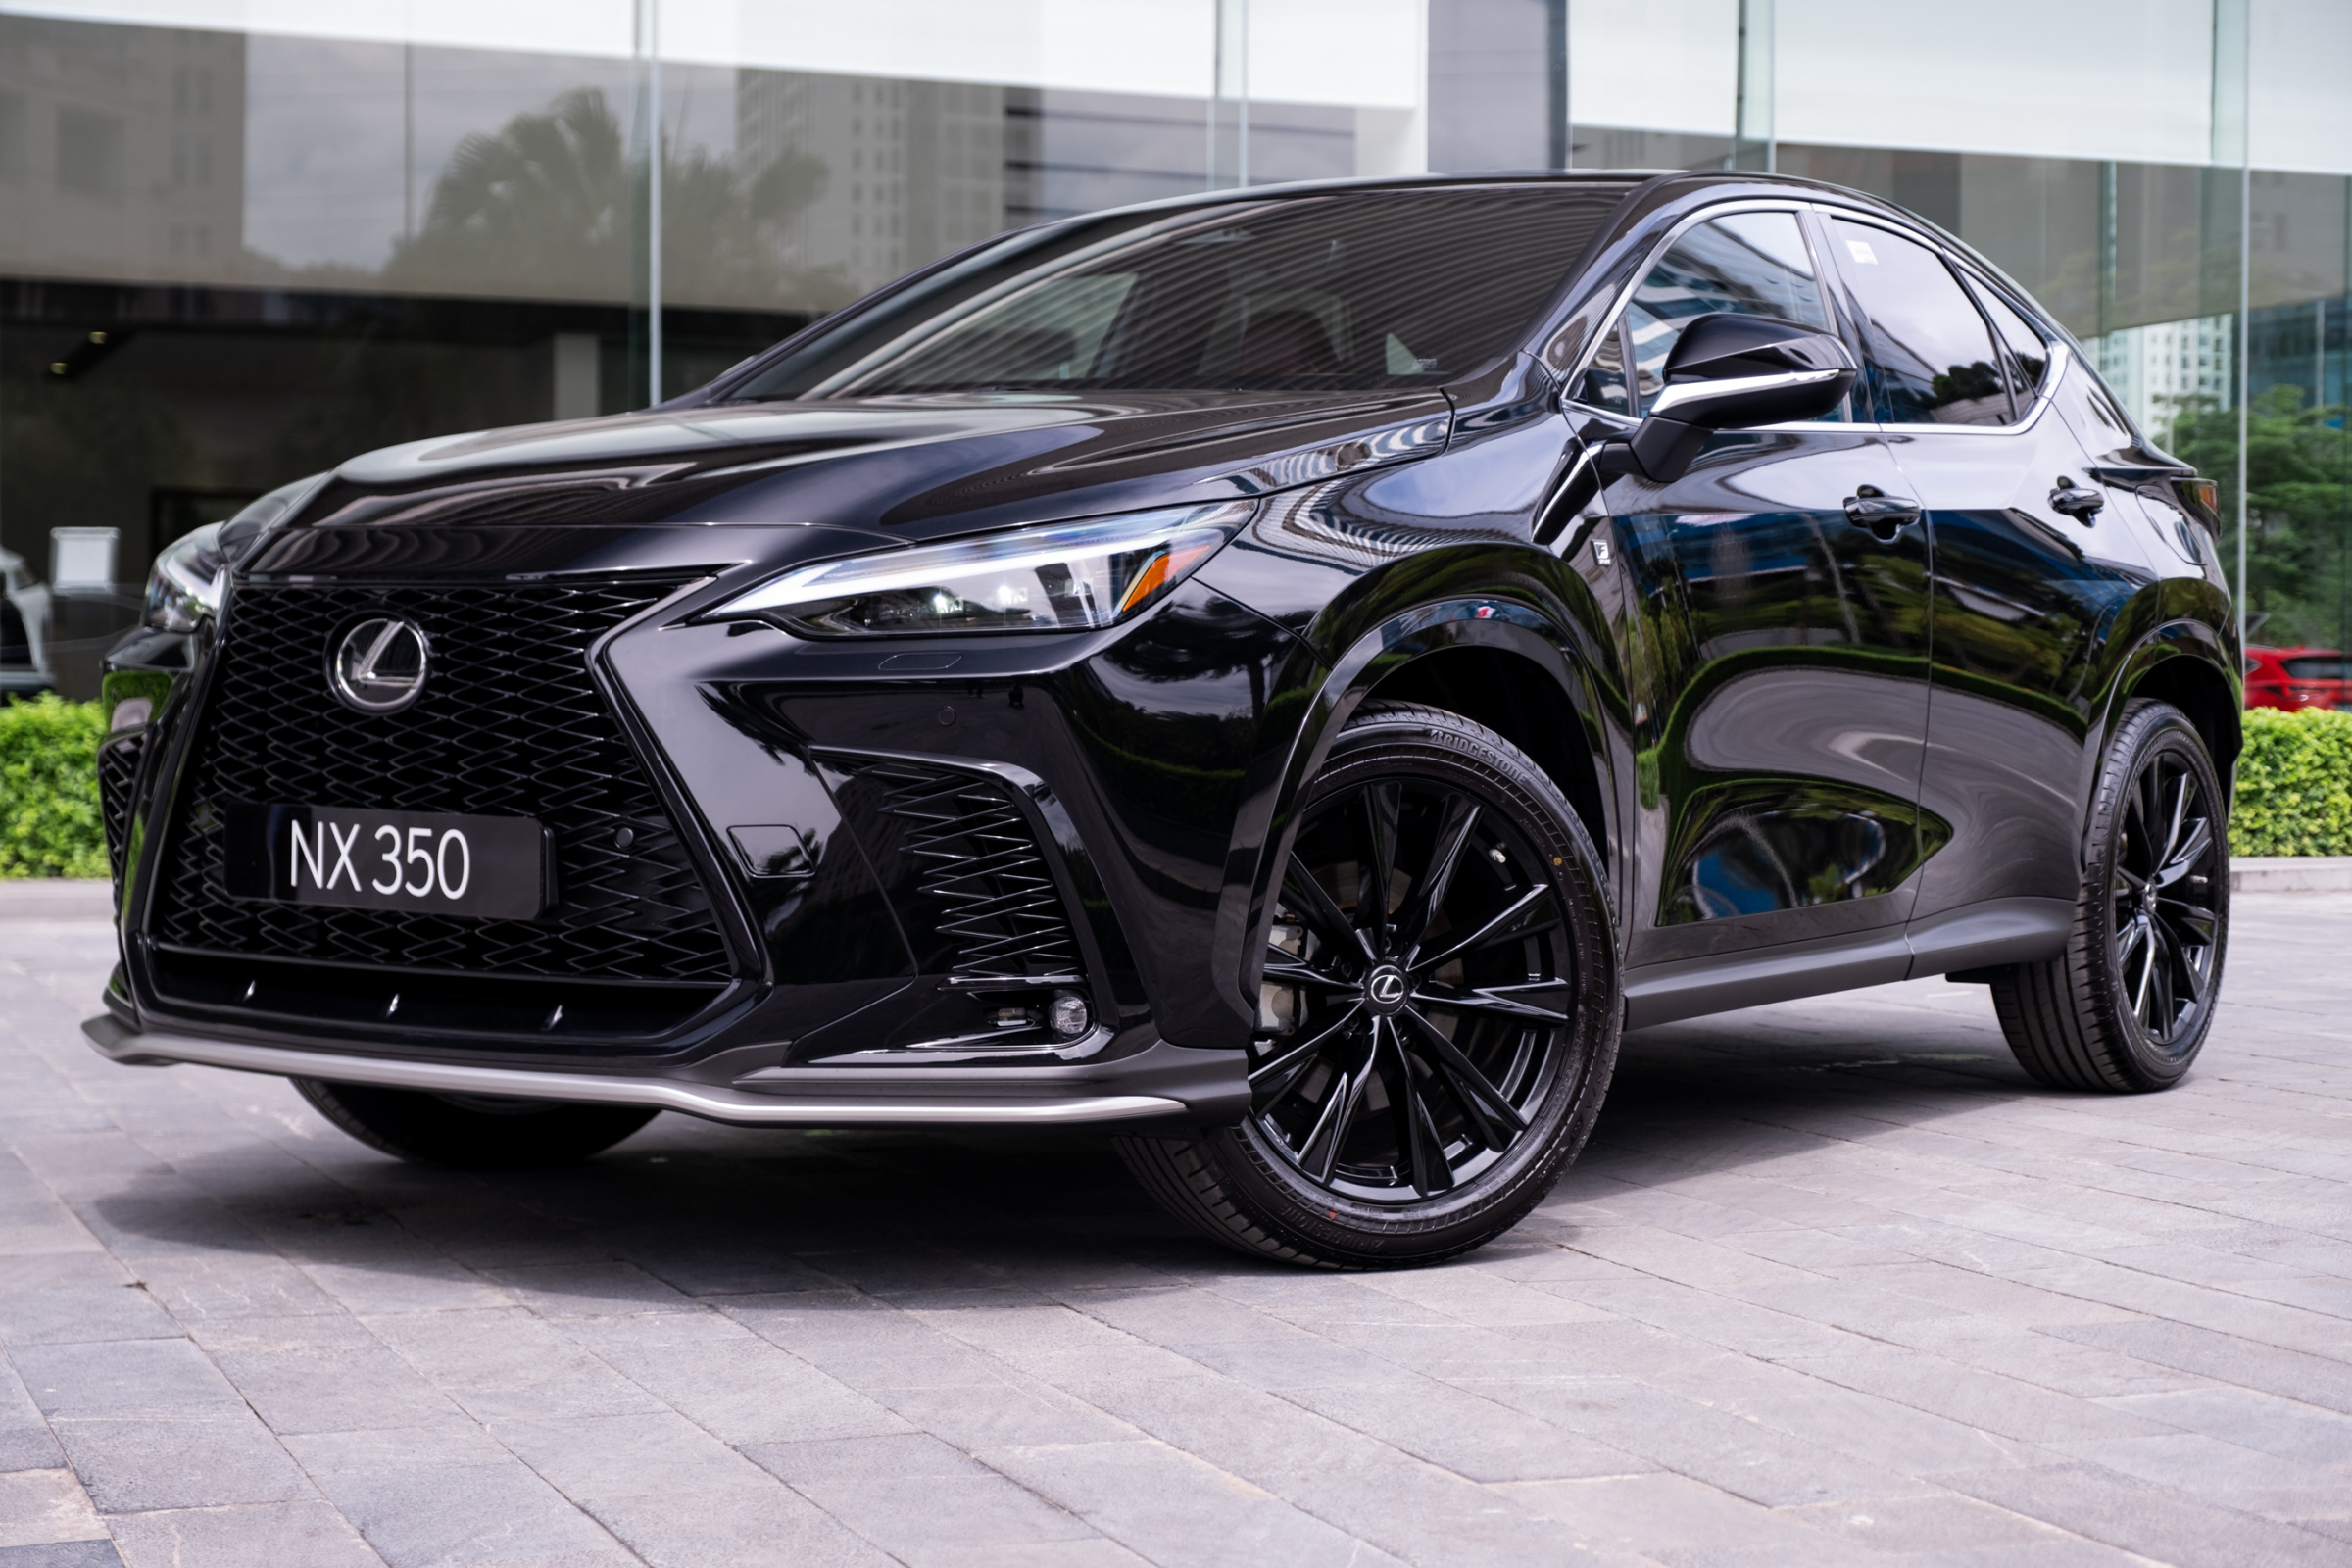 bao john wick surprised everyone by giving lance reddick a lexus nx as a thank you for his recent support 653d71568a4b7 John Wick Surprised Everyone By Giving Lance Reddick A Lexus Nx300 As A Thank-you For His Recent Support.